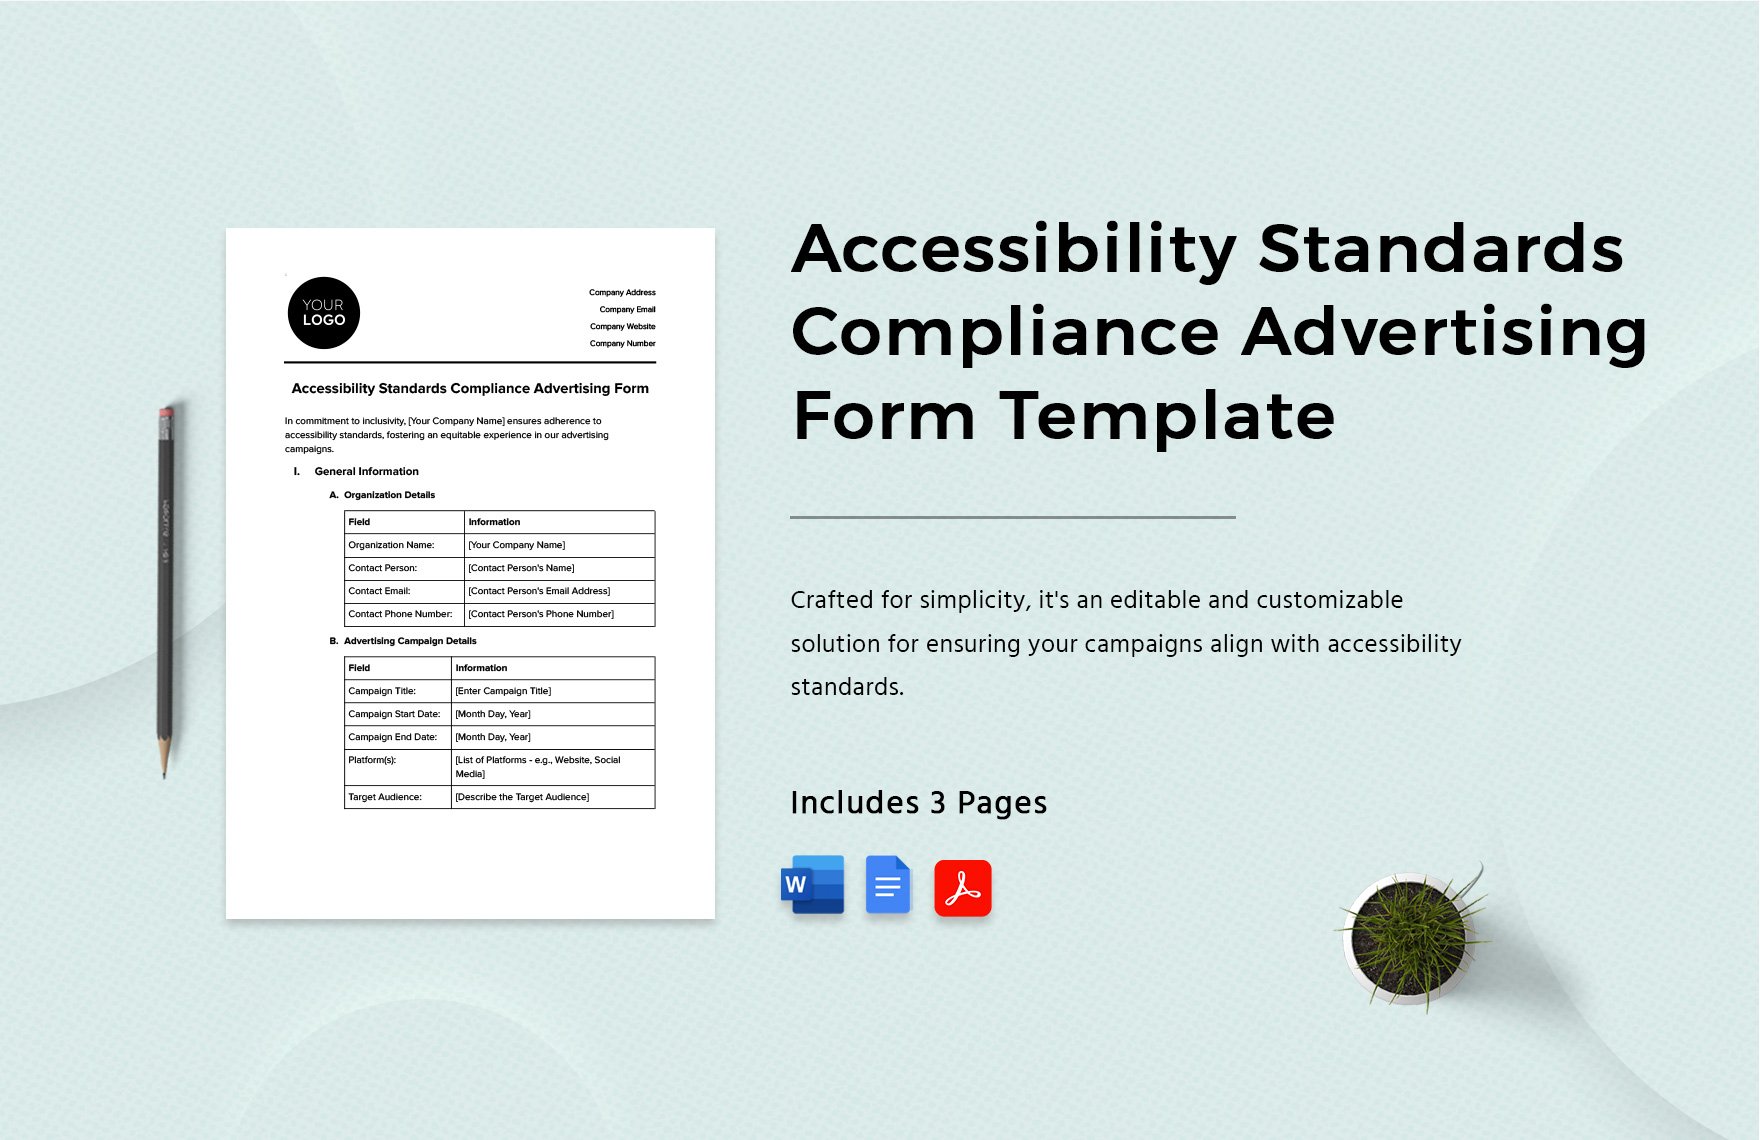 Accessibility Standards Compliance Advertising Form Template in Word, Google Docs, PDF